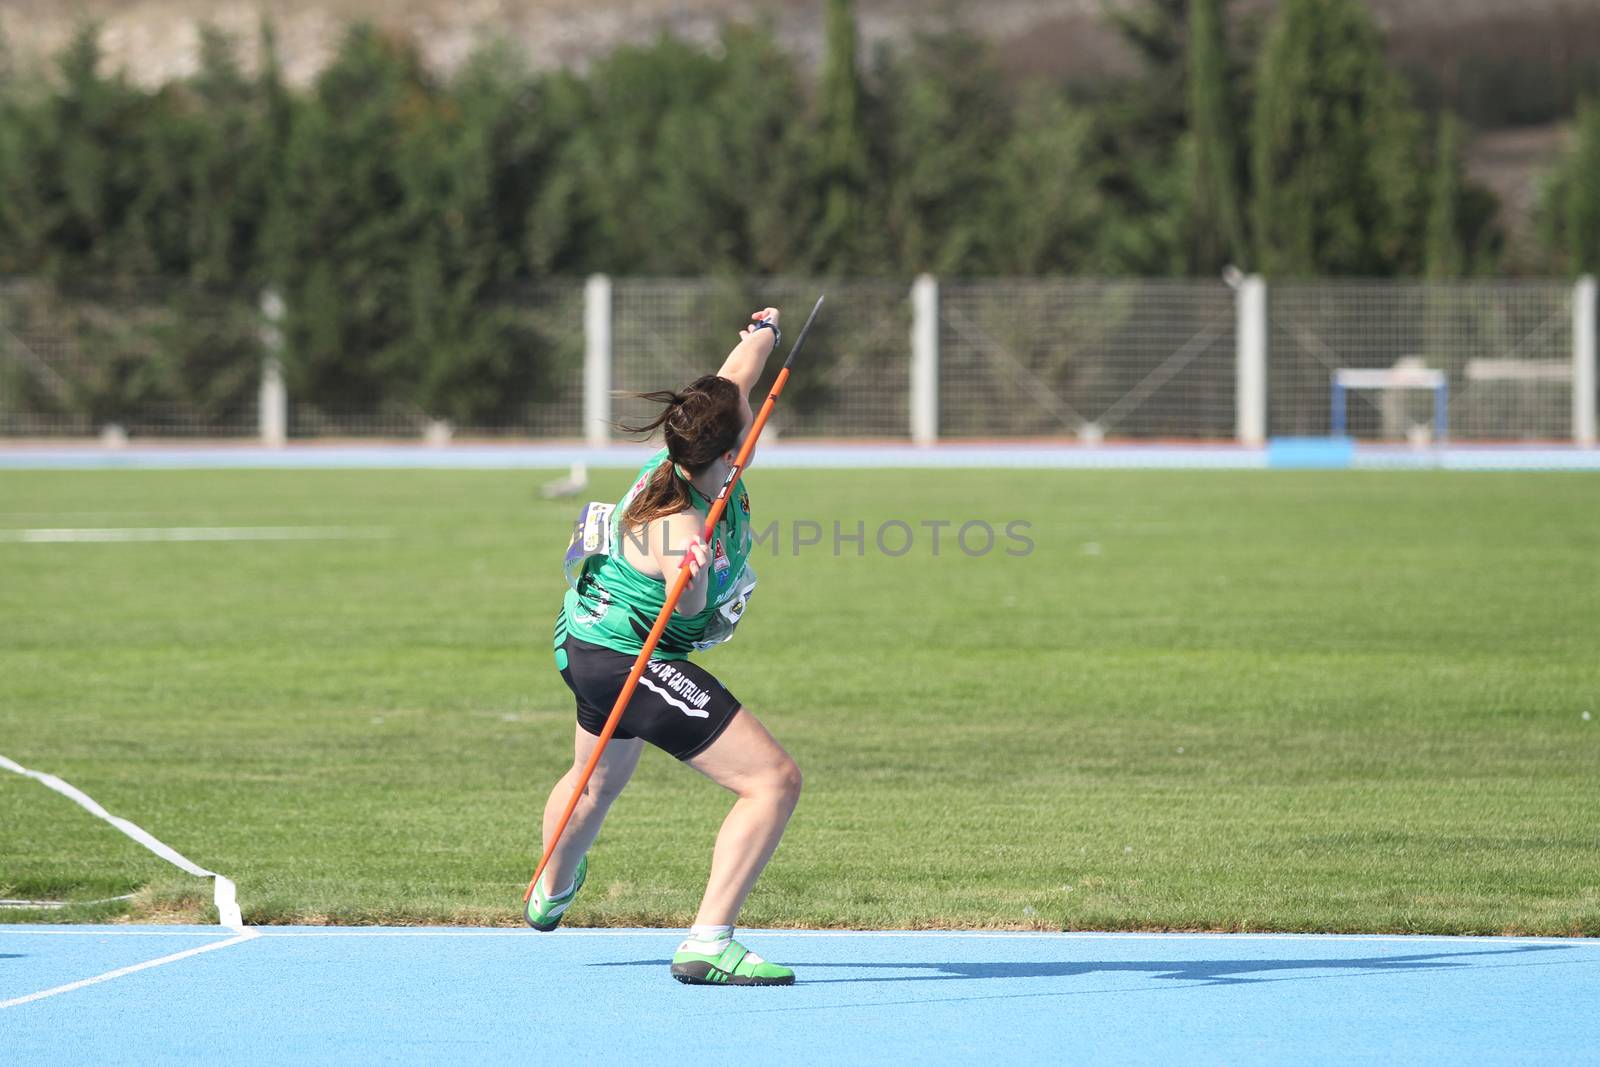 ISTANBUL, TURKEY - SEPTEMBER 19, 2015: Athlete Marta Mancebo javelin throwing during European Champion Clubs Cup Track and Field Juniors Group A